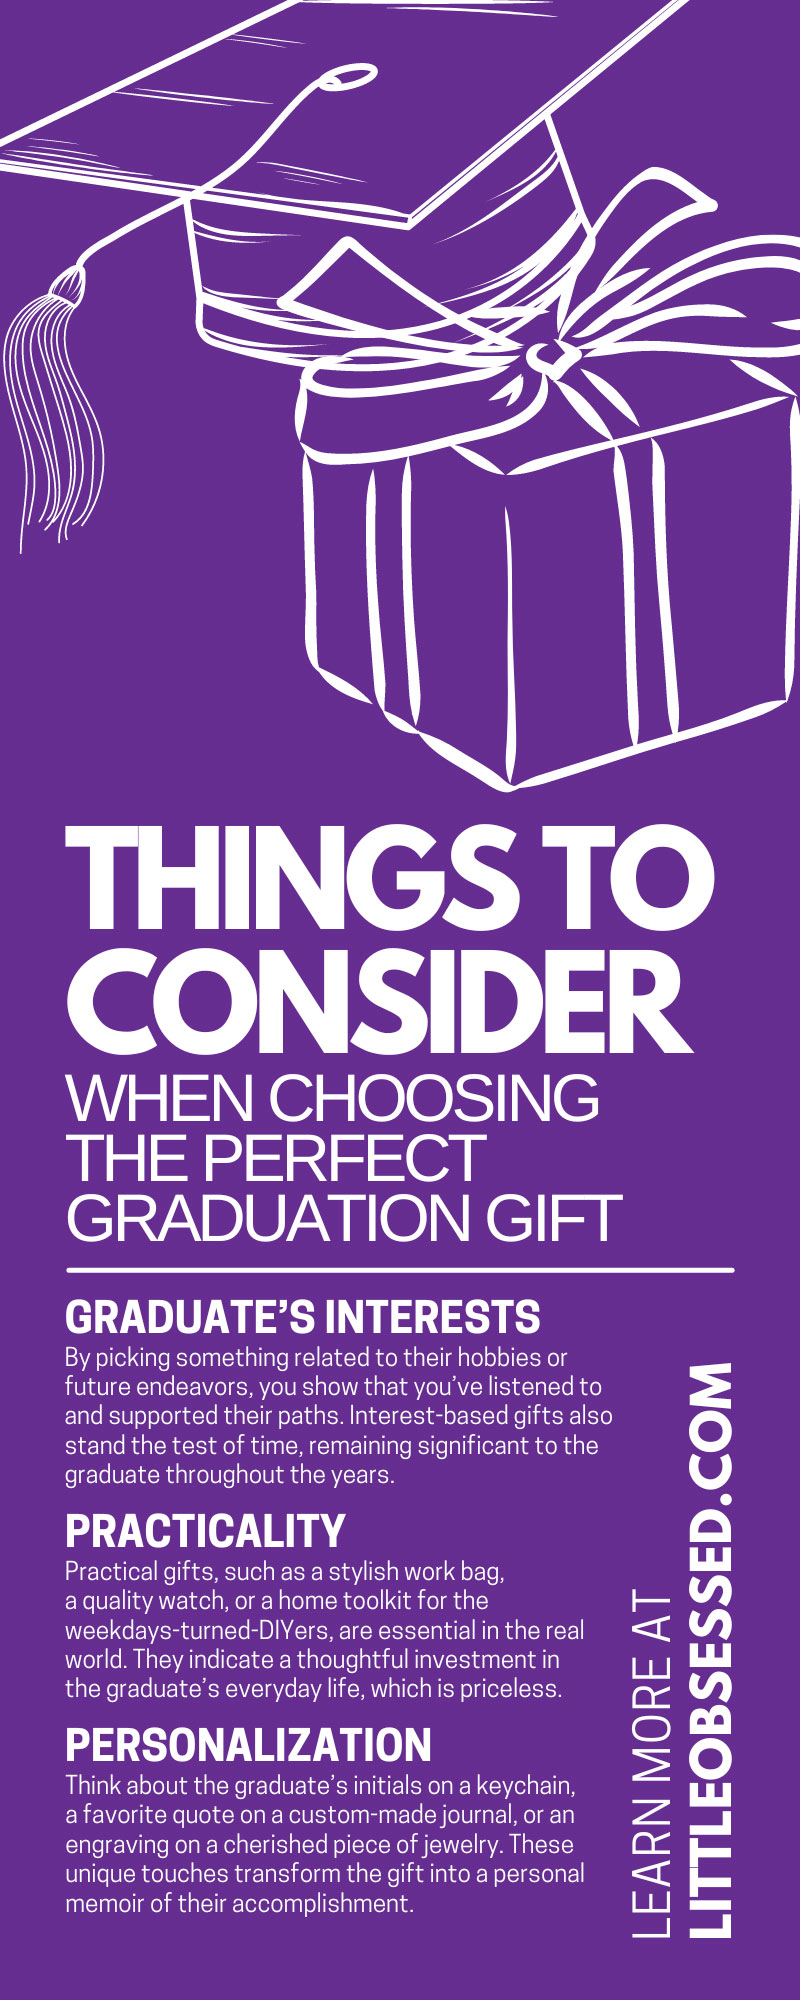 Things To Consider When Choosing the Perfect Graduation Gift